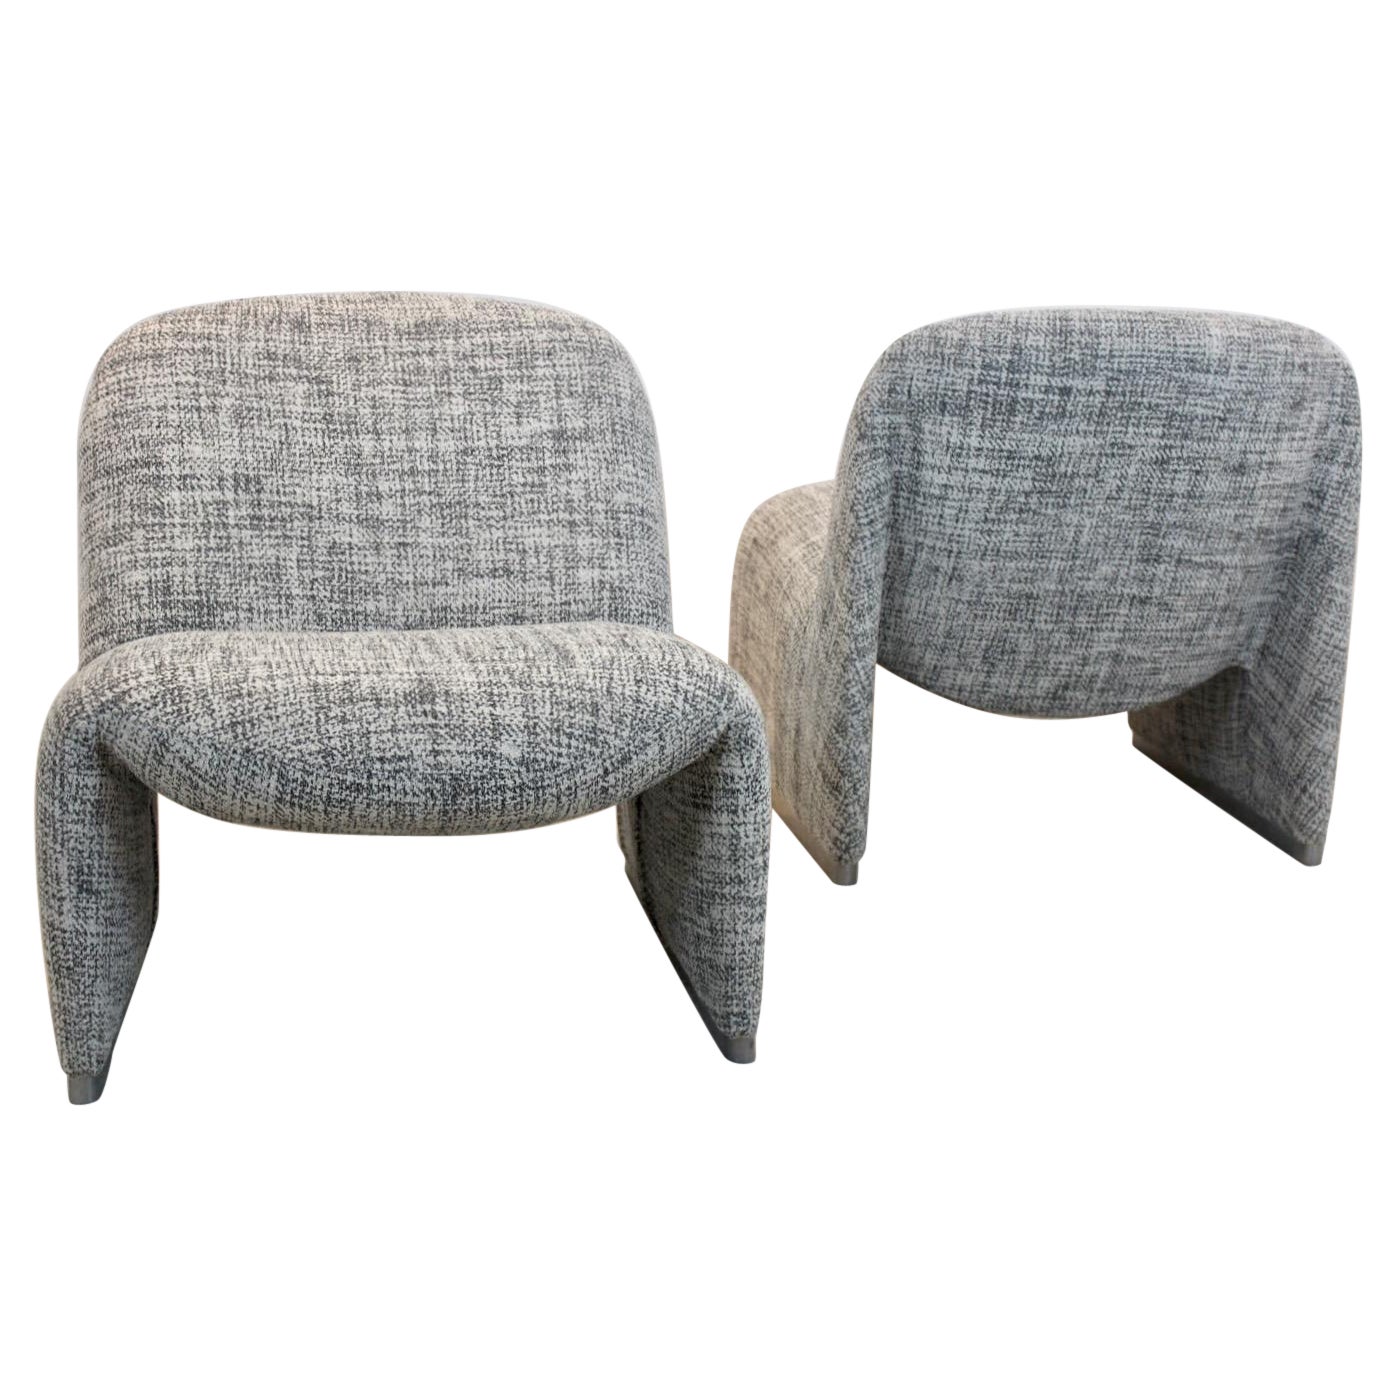 Exquisite Pair of Artifort Alky Chairs by Giancarlo Piretti For Sale